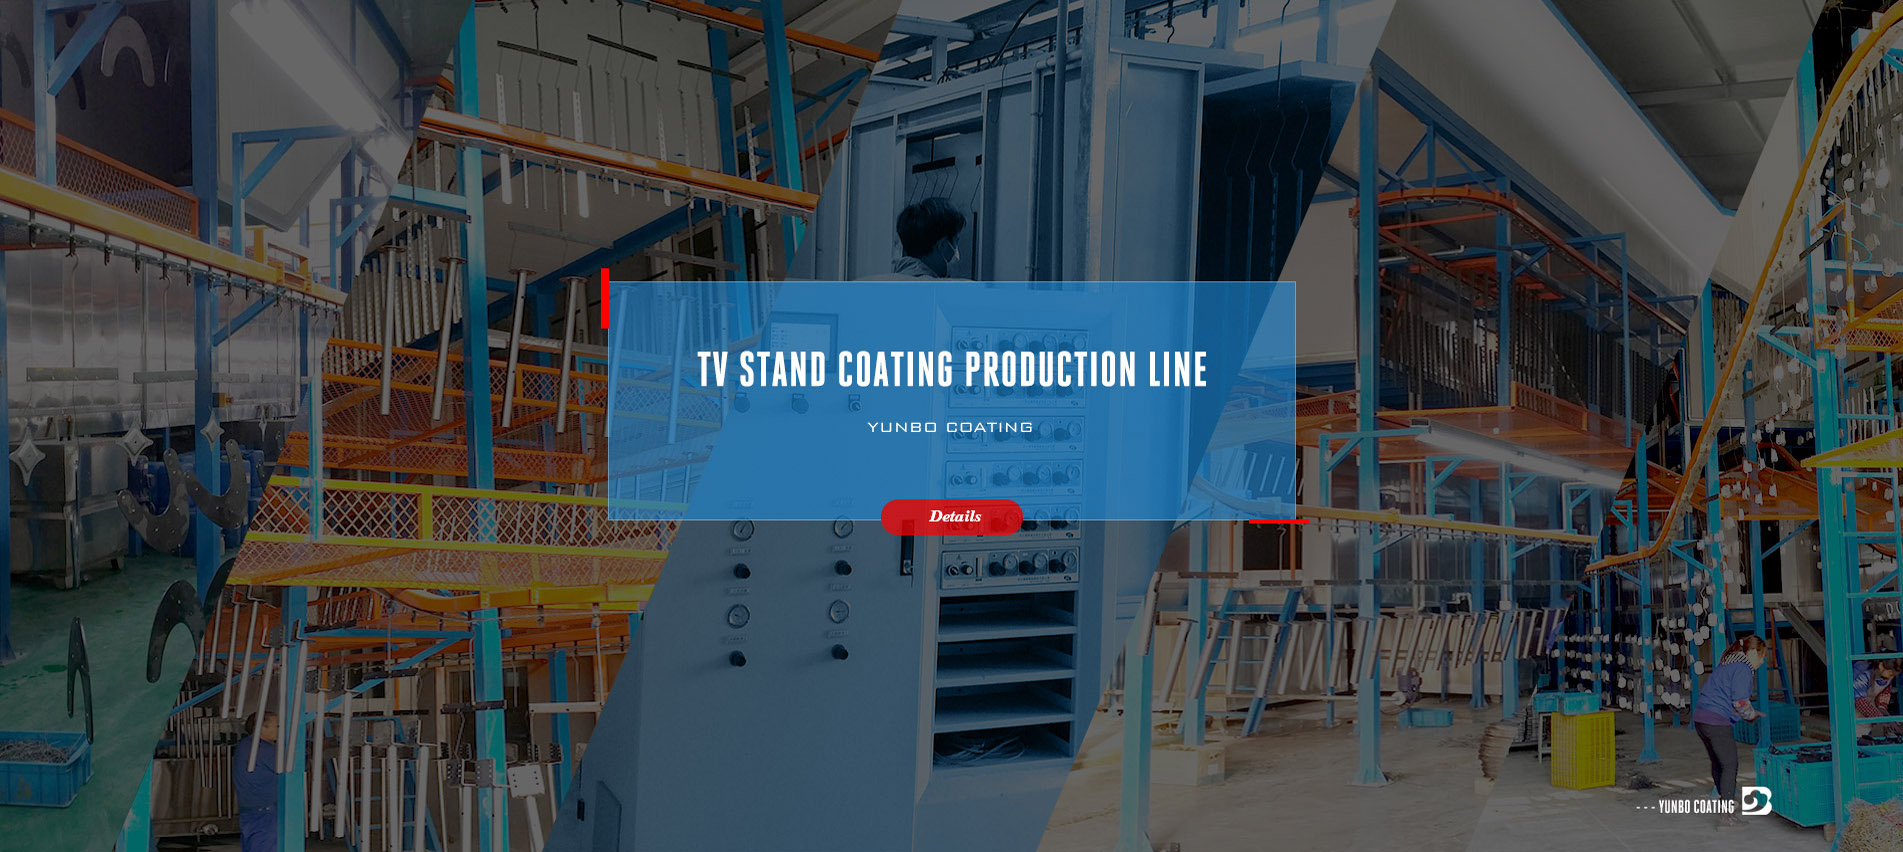 TV STAND COATING PRODUCTION LINE